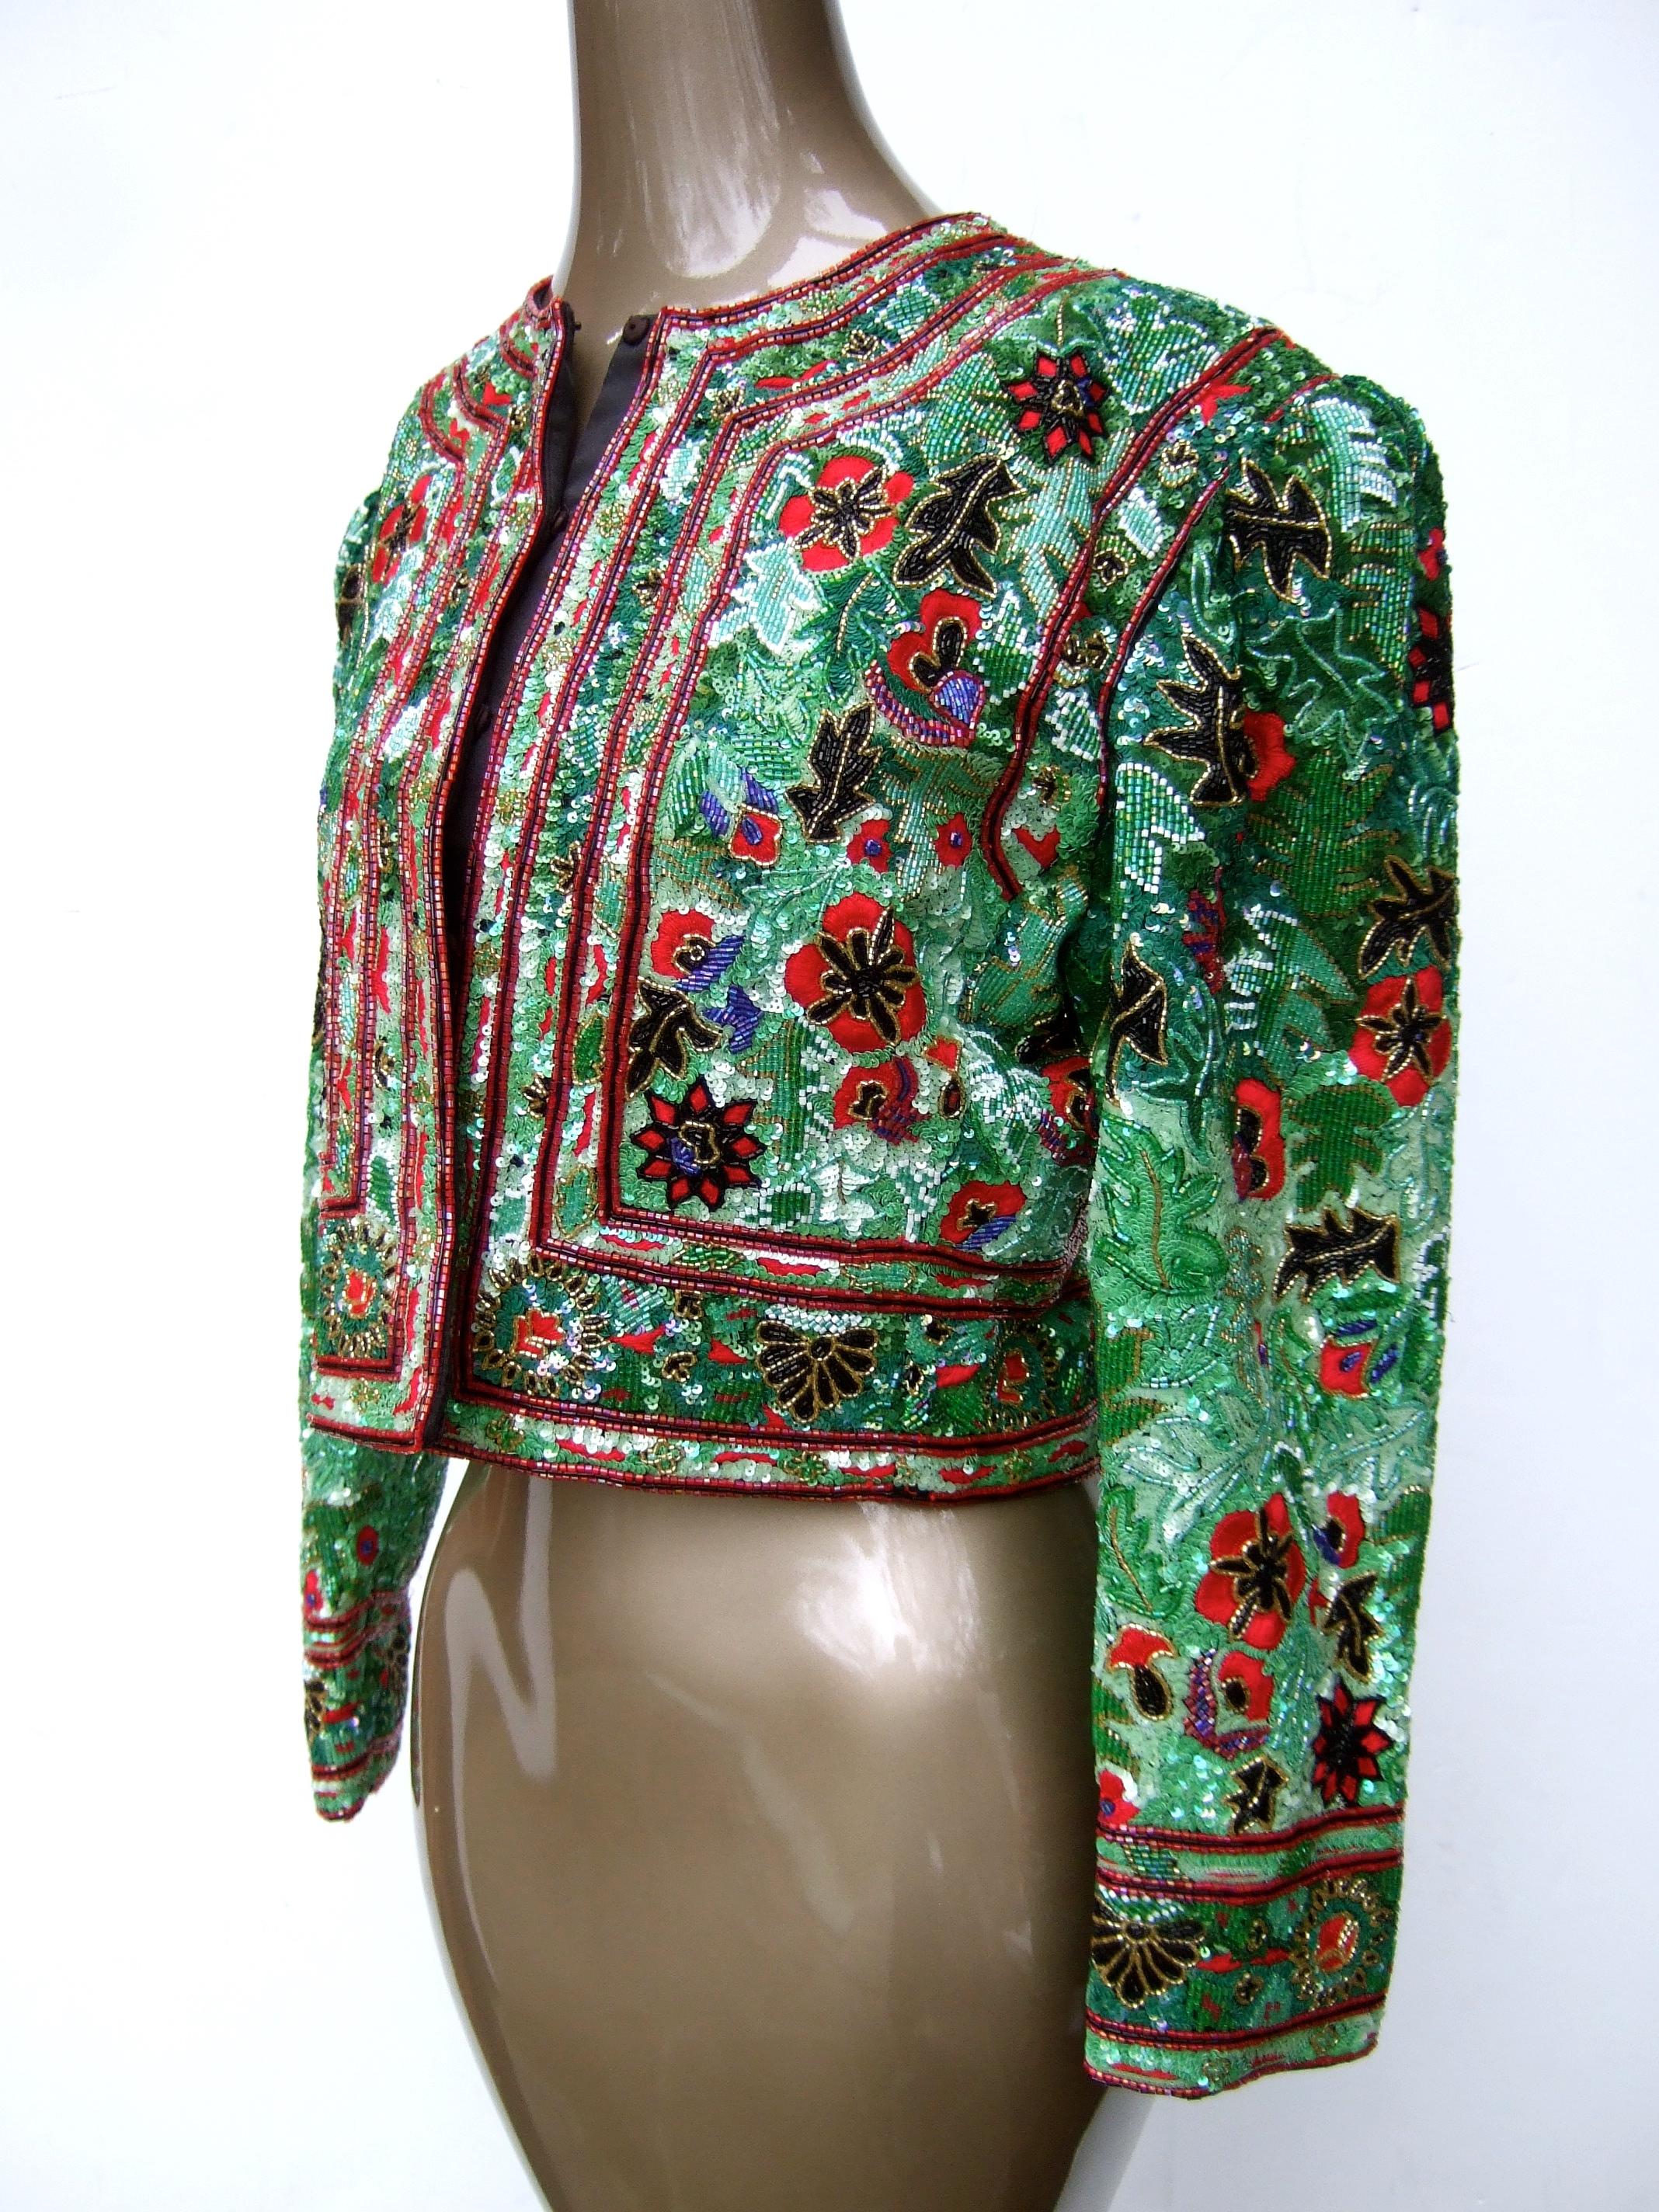 Women's Exquisite Elaborate Glass Floral Beaded Embroidered Bolero Jacket c 1980s For Sale